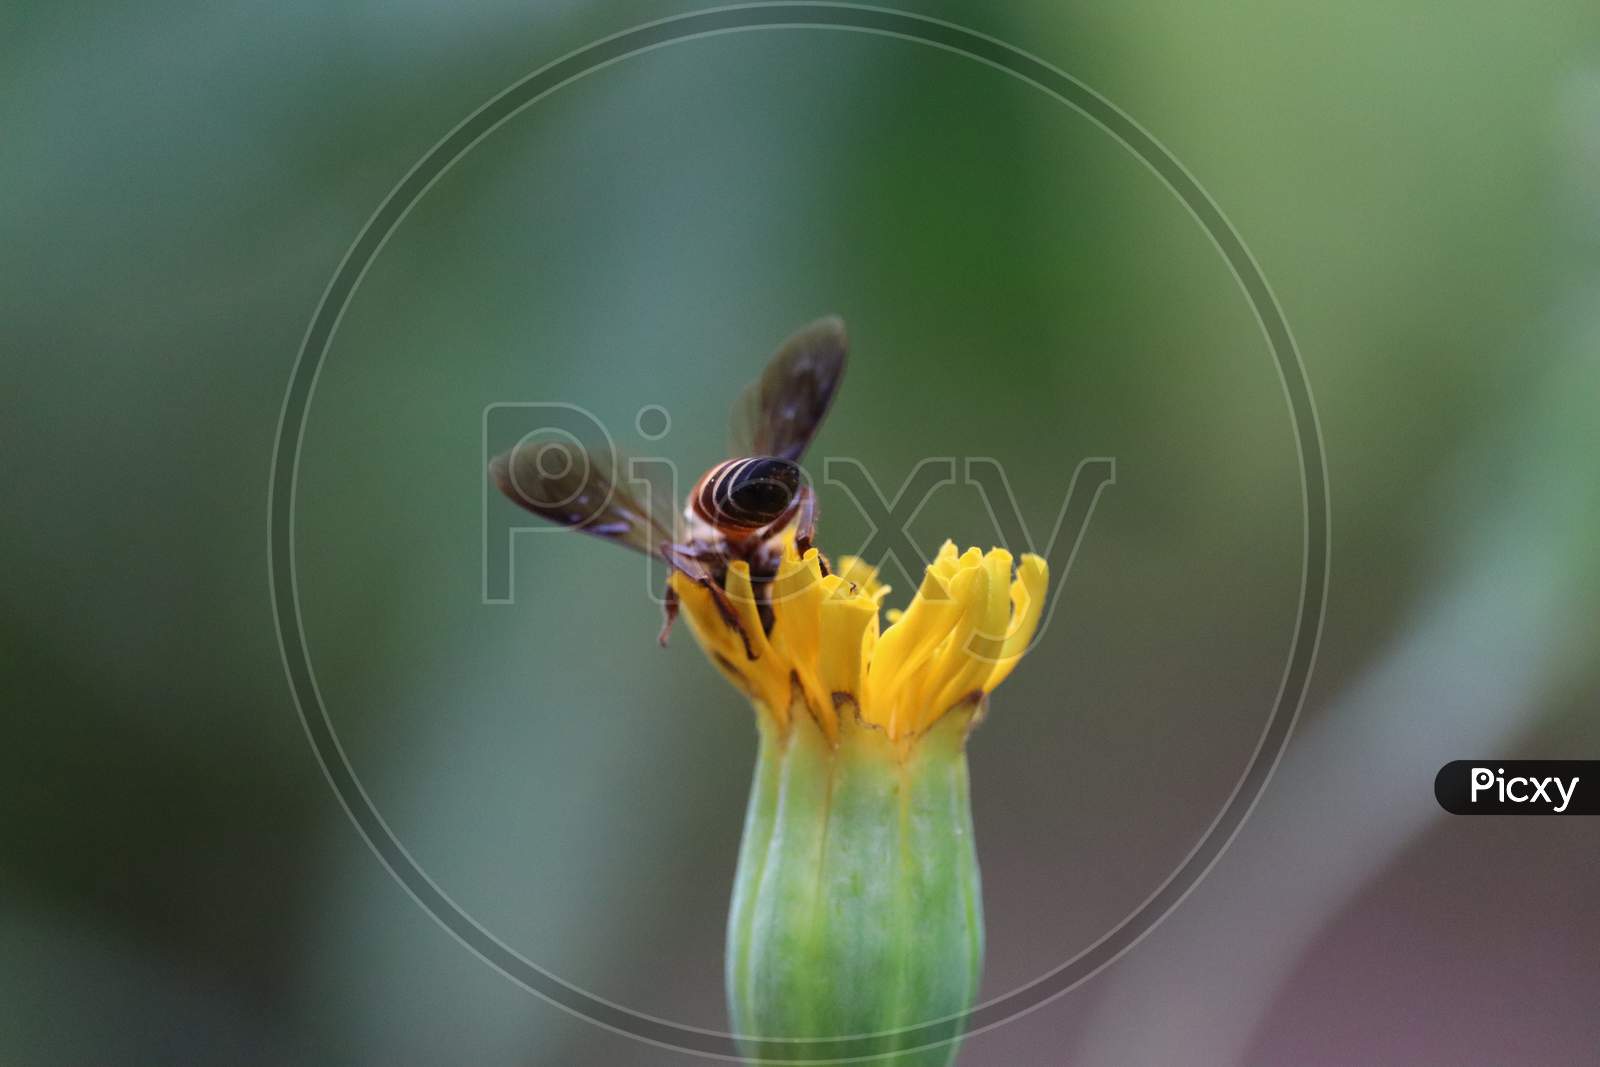 Honey Bee Covered With Yellow Pollen Collecting Nectar From Marigold Flower.Rajasthan, India